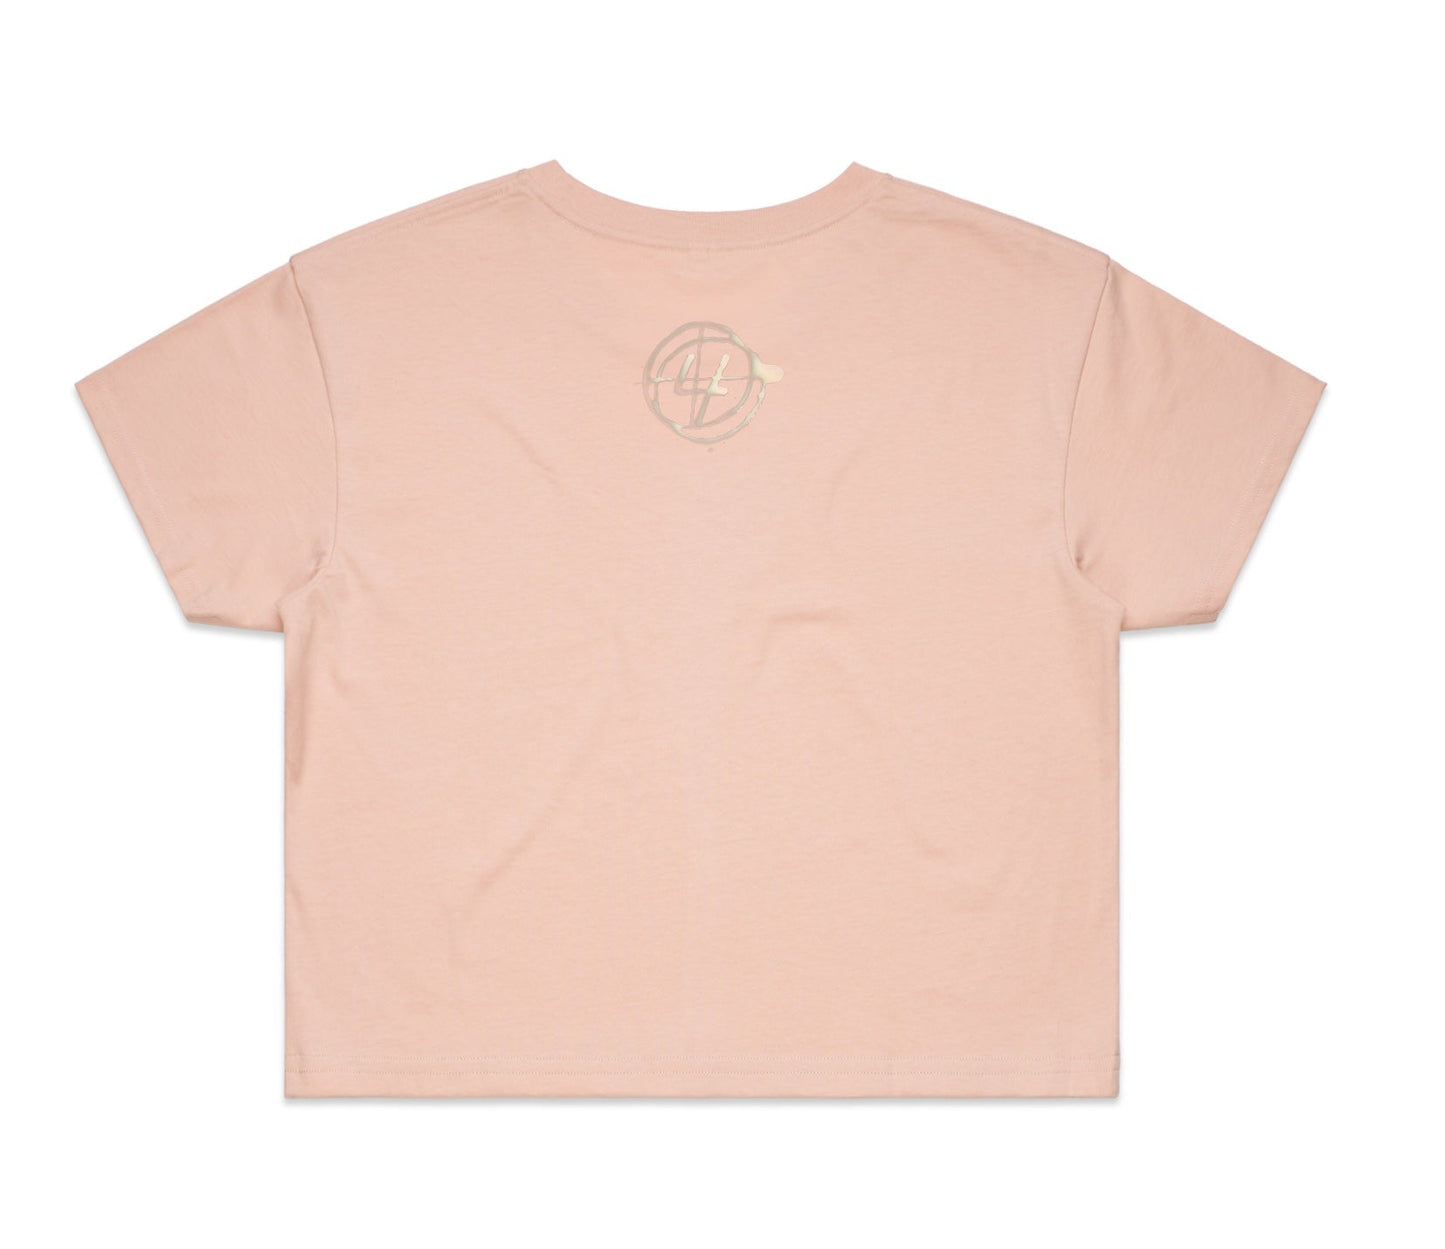 Maman Cropped Shirt in Pink